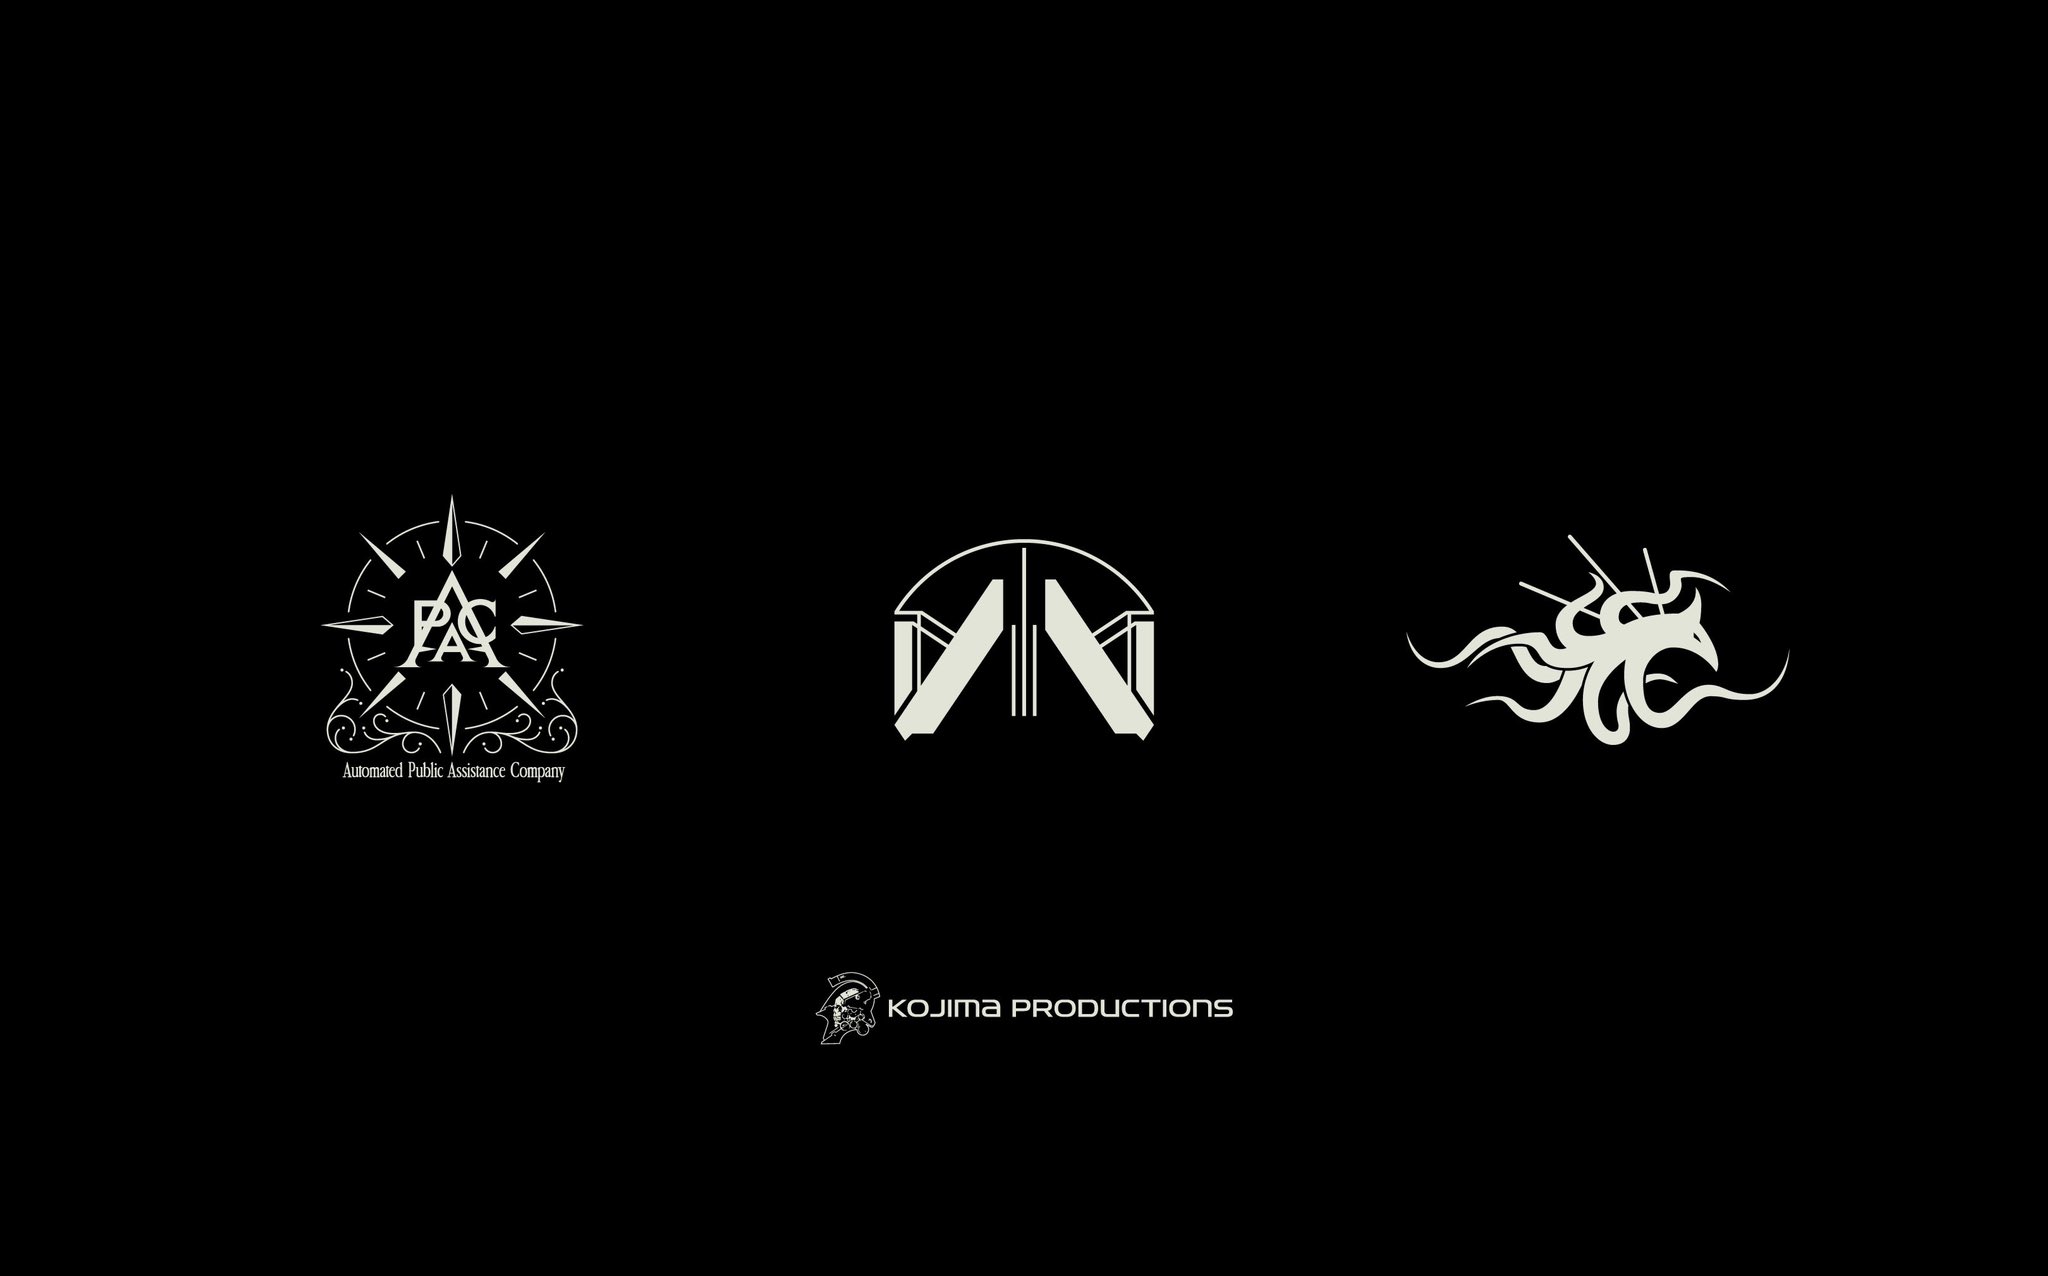 Hideo Kojima reveals several logos in reference to his new game